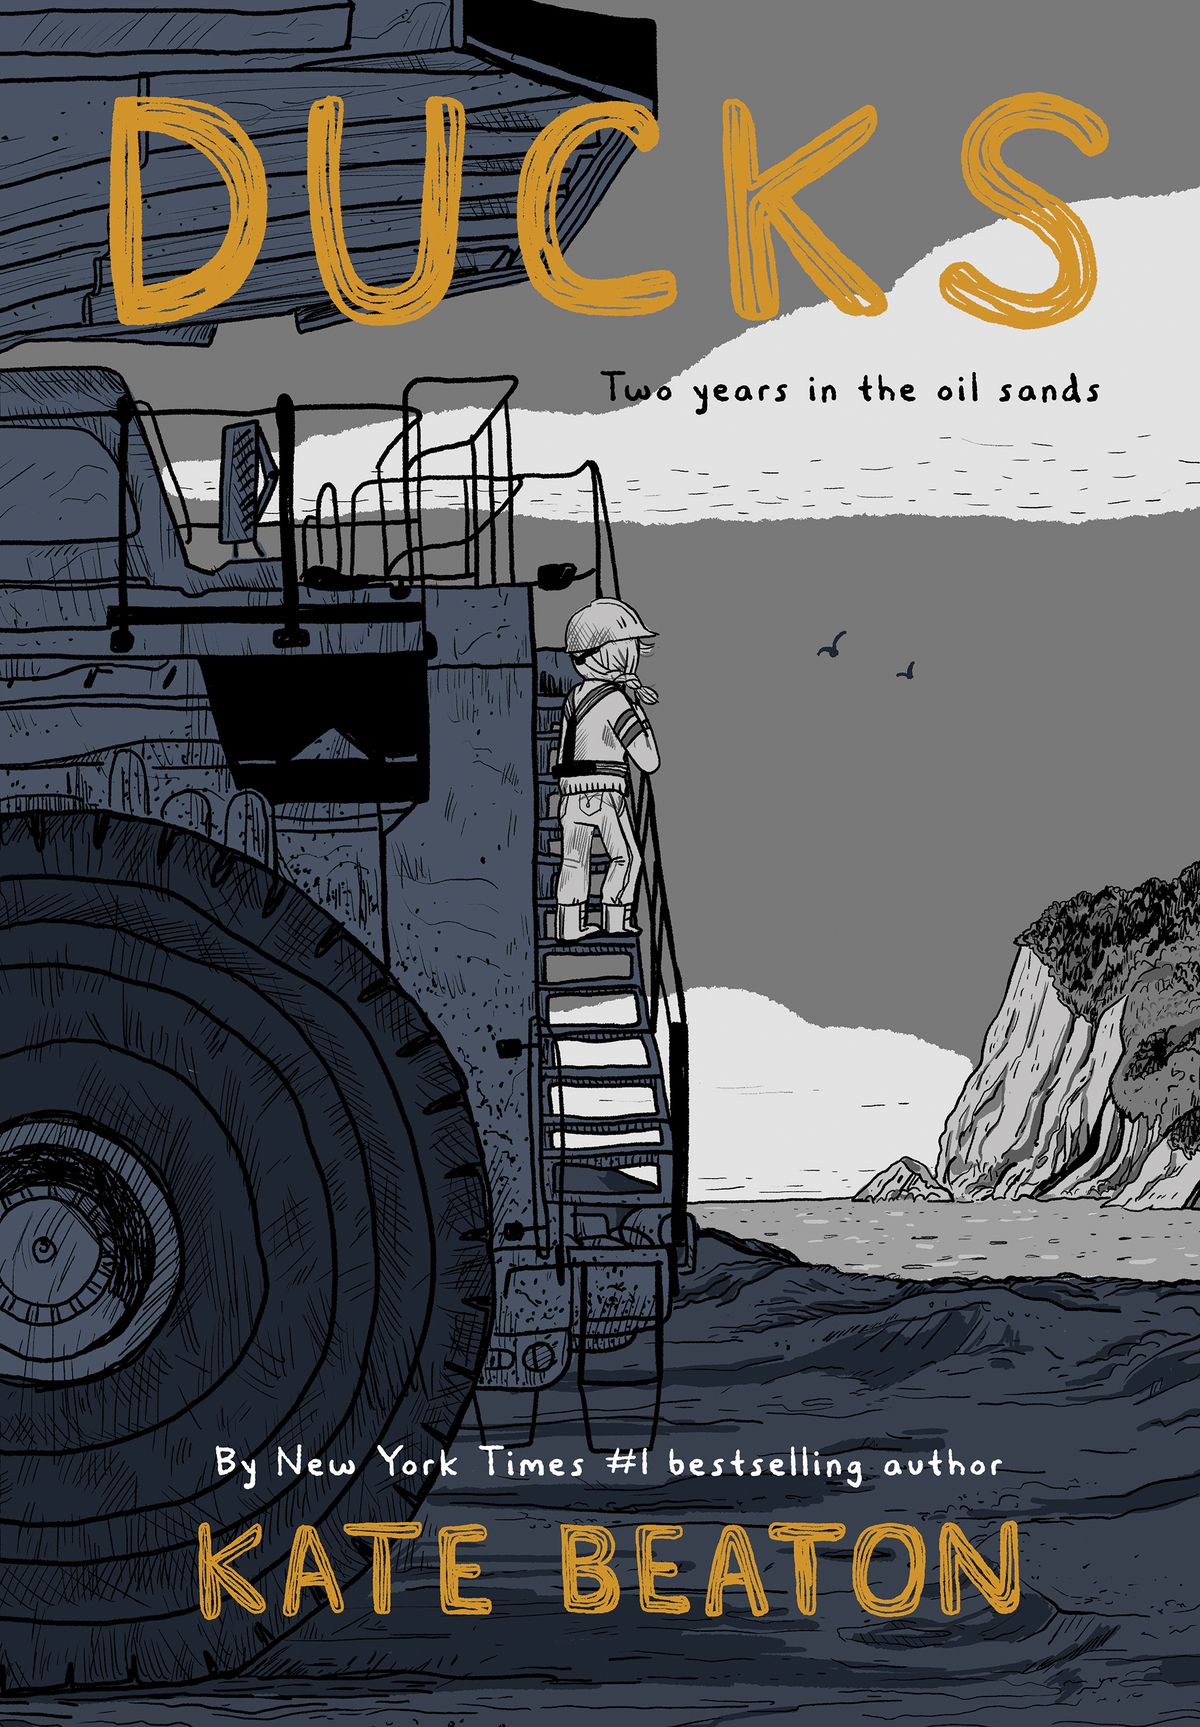 The cover of the book “Ducks: Two years in the oil sands” features a drawing of a person standing on the stairs of a huge truck, looking out at sand and a cliff.